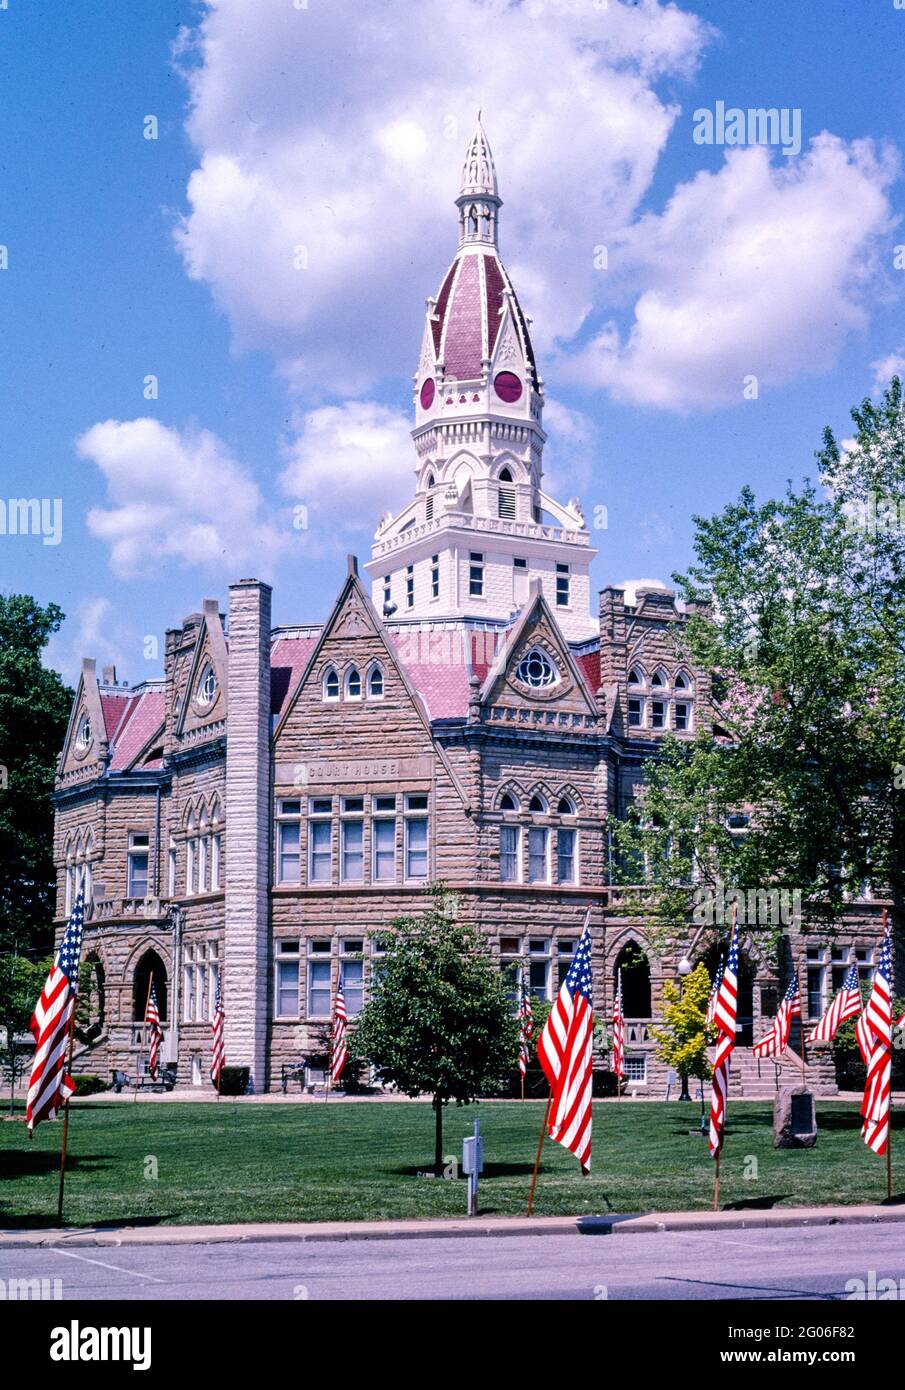 2000s United States -  Pike County Courthouse, Pittsfield, Illinois 2003 Stock Photo